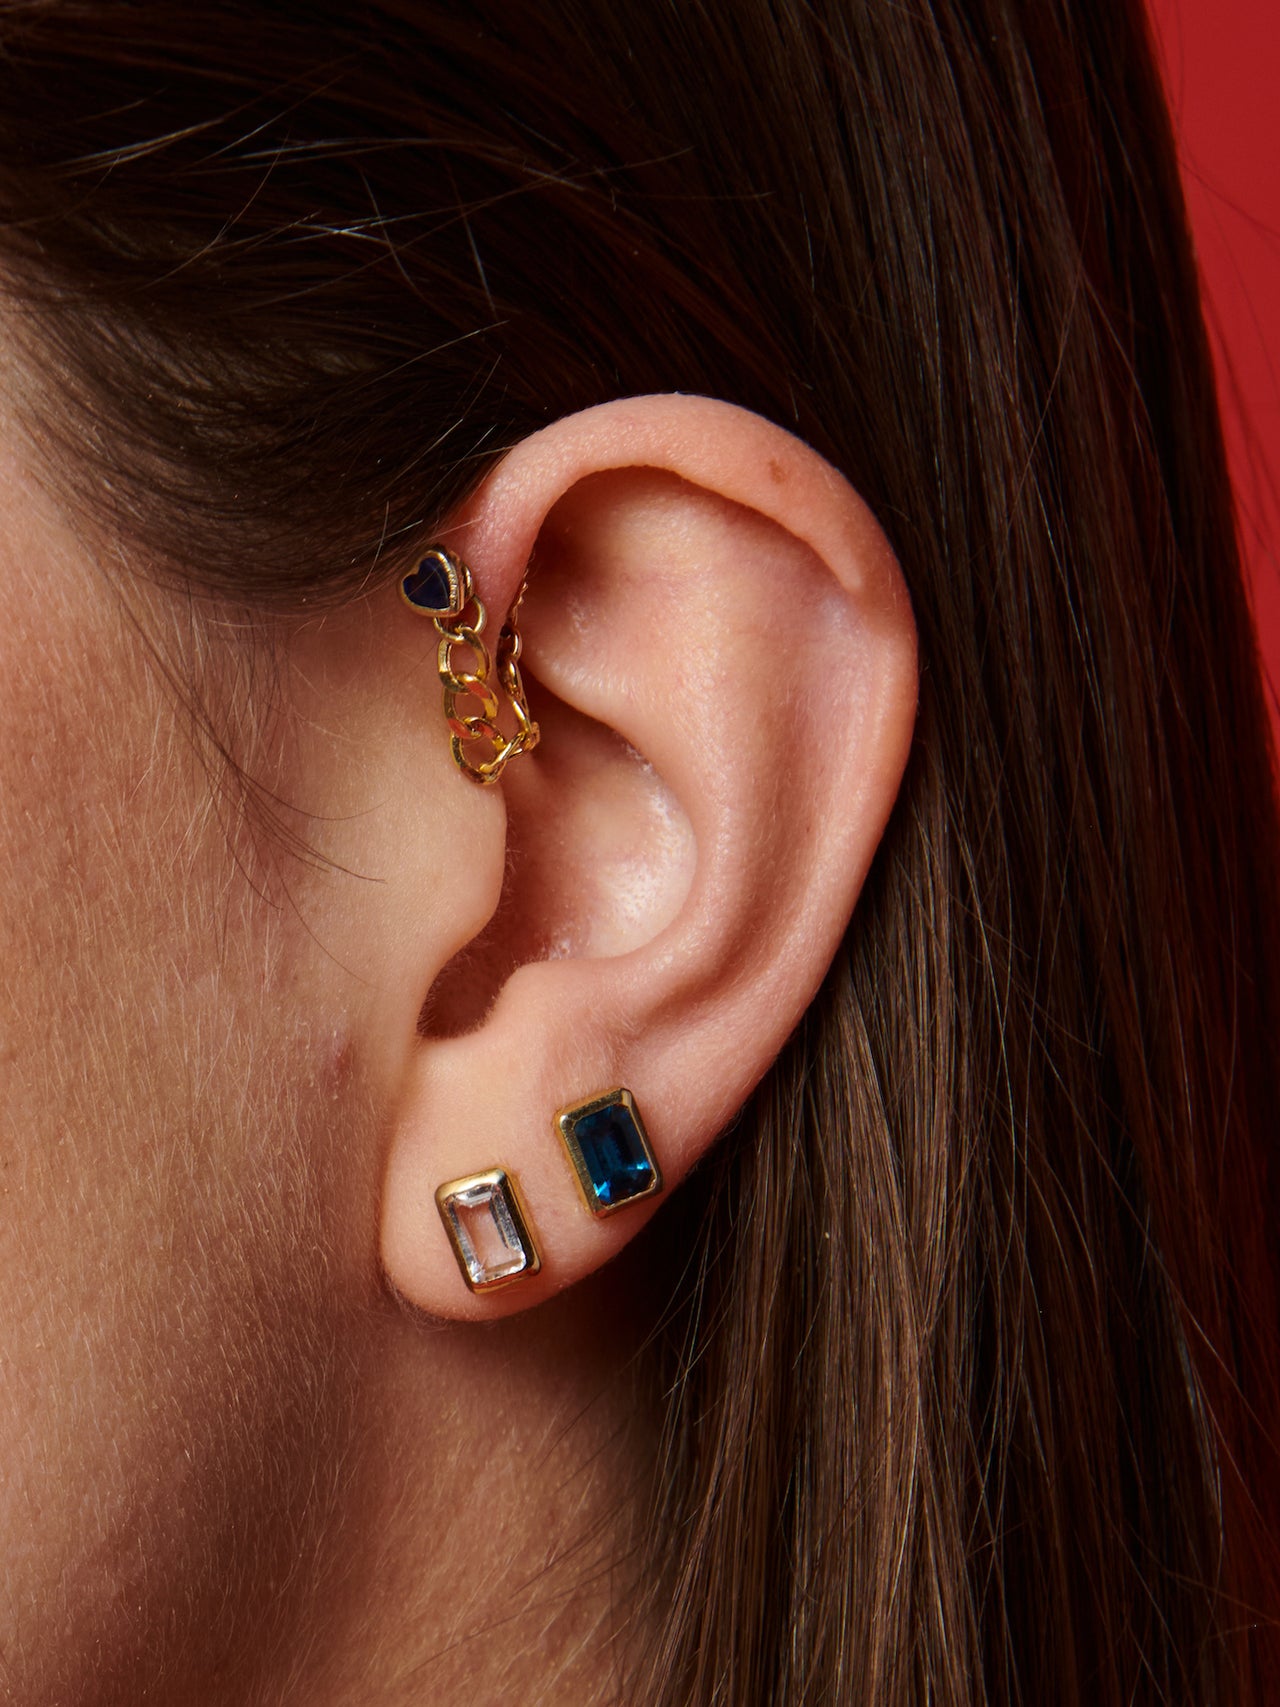 14kt Yellow Gold Heart Gemstone Studs pictured on ear. Shown in cartilage piercing.